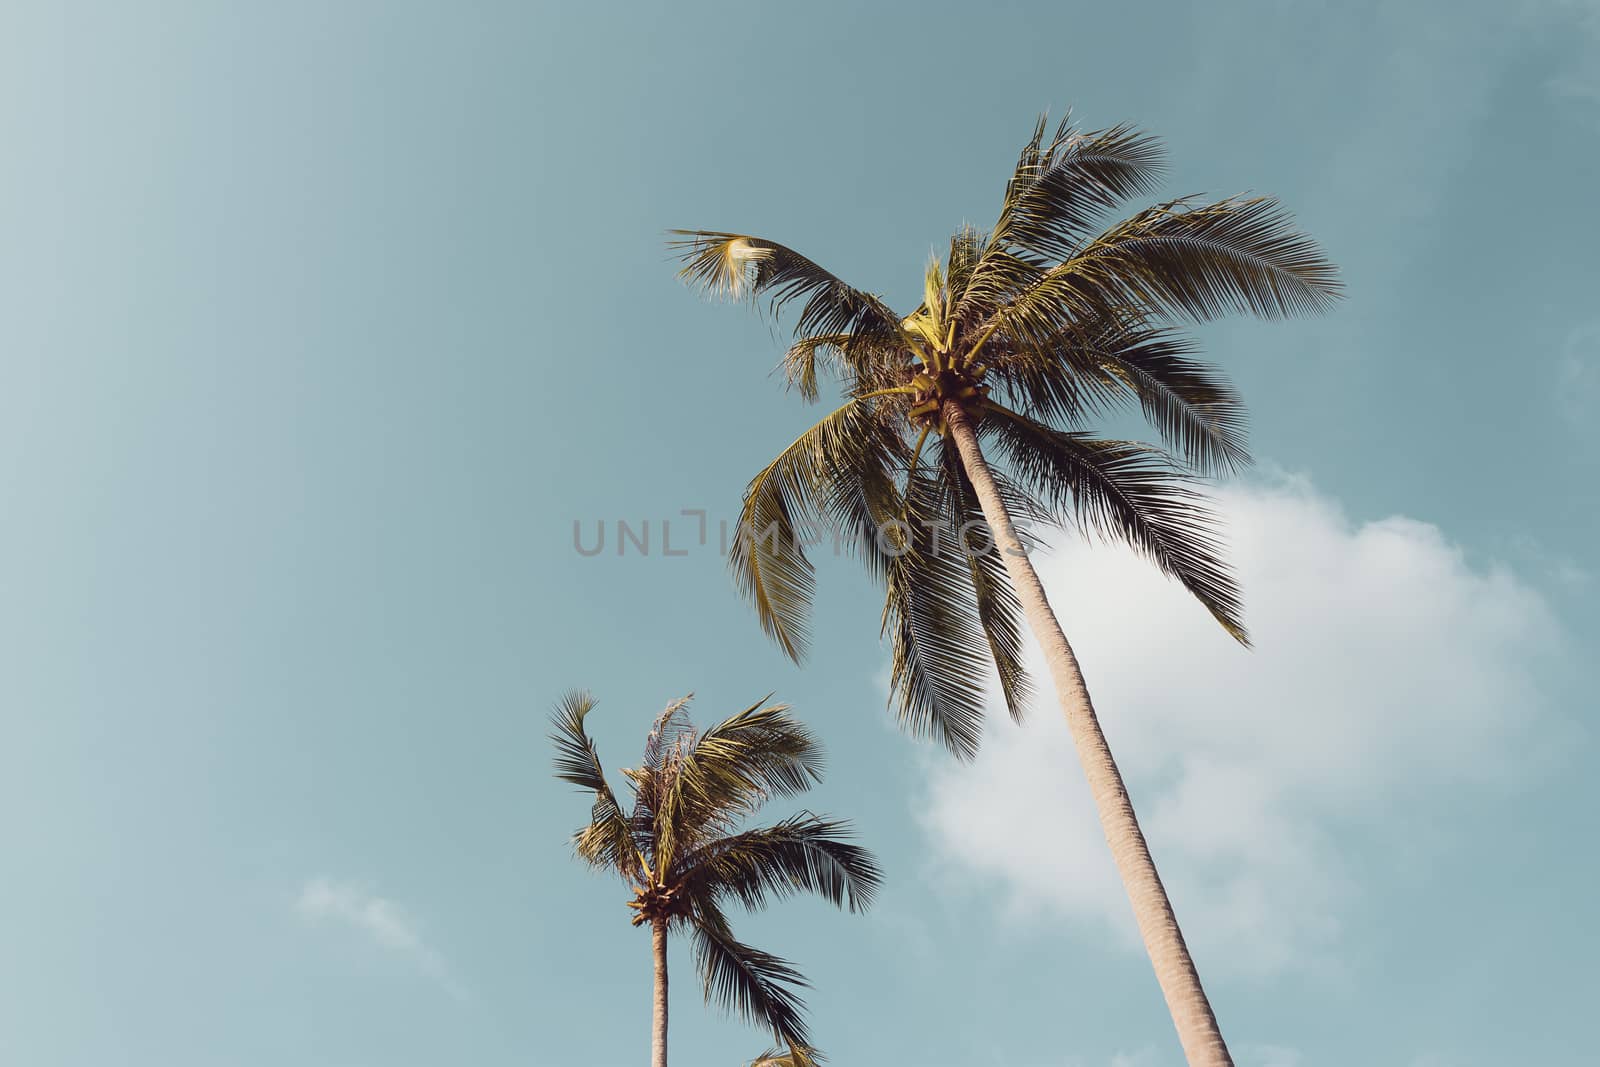 coconut palm trees against the blue sky with vintage color filter